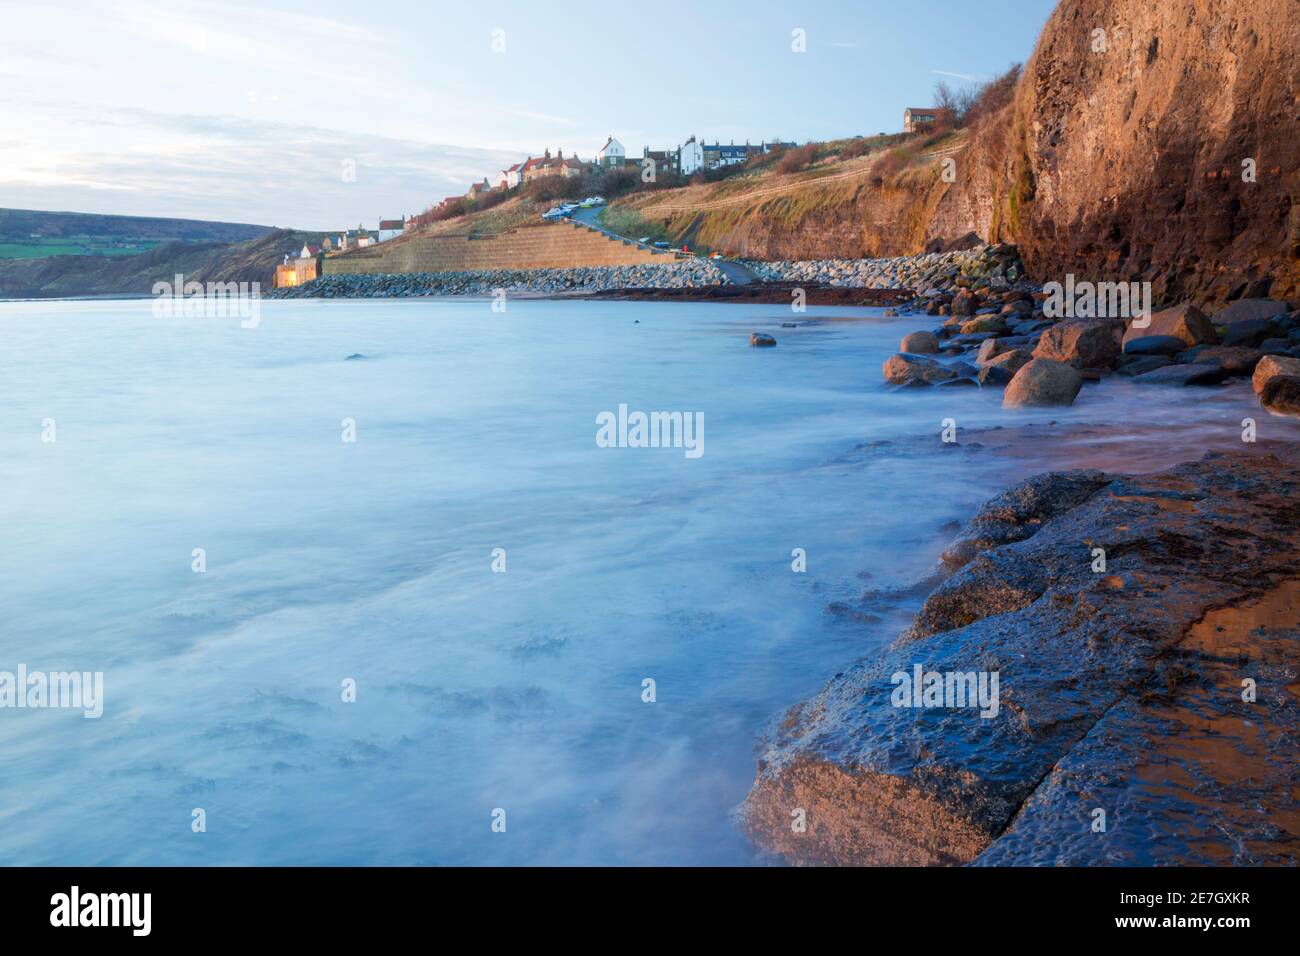 Early morning view of Robin Hood's Bay, showing sea-worn cliff errosion, rock sea defences and sea wall defences below the village itself. Stock Photo